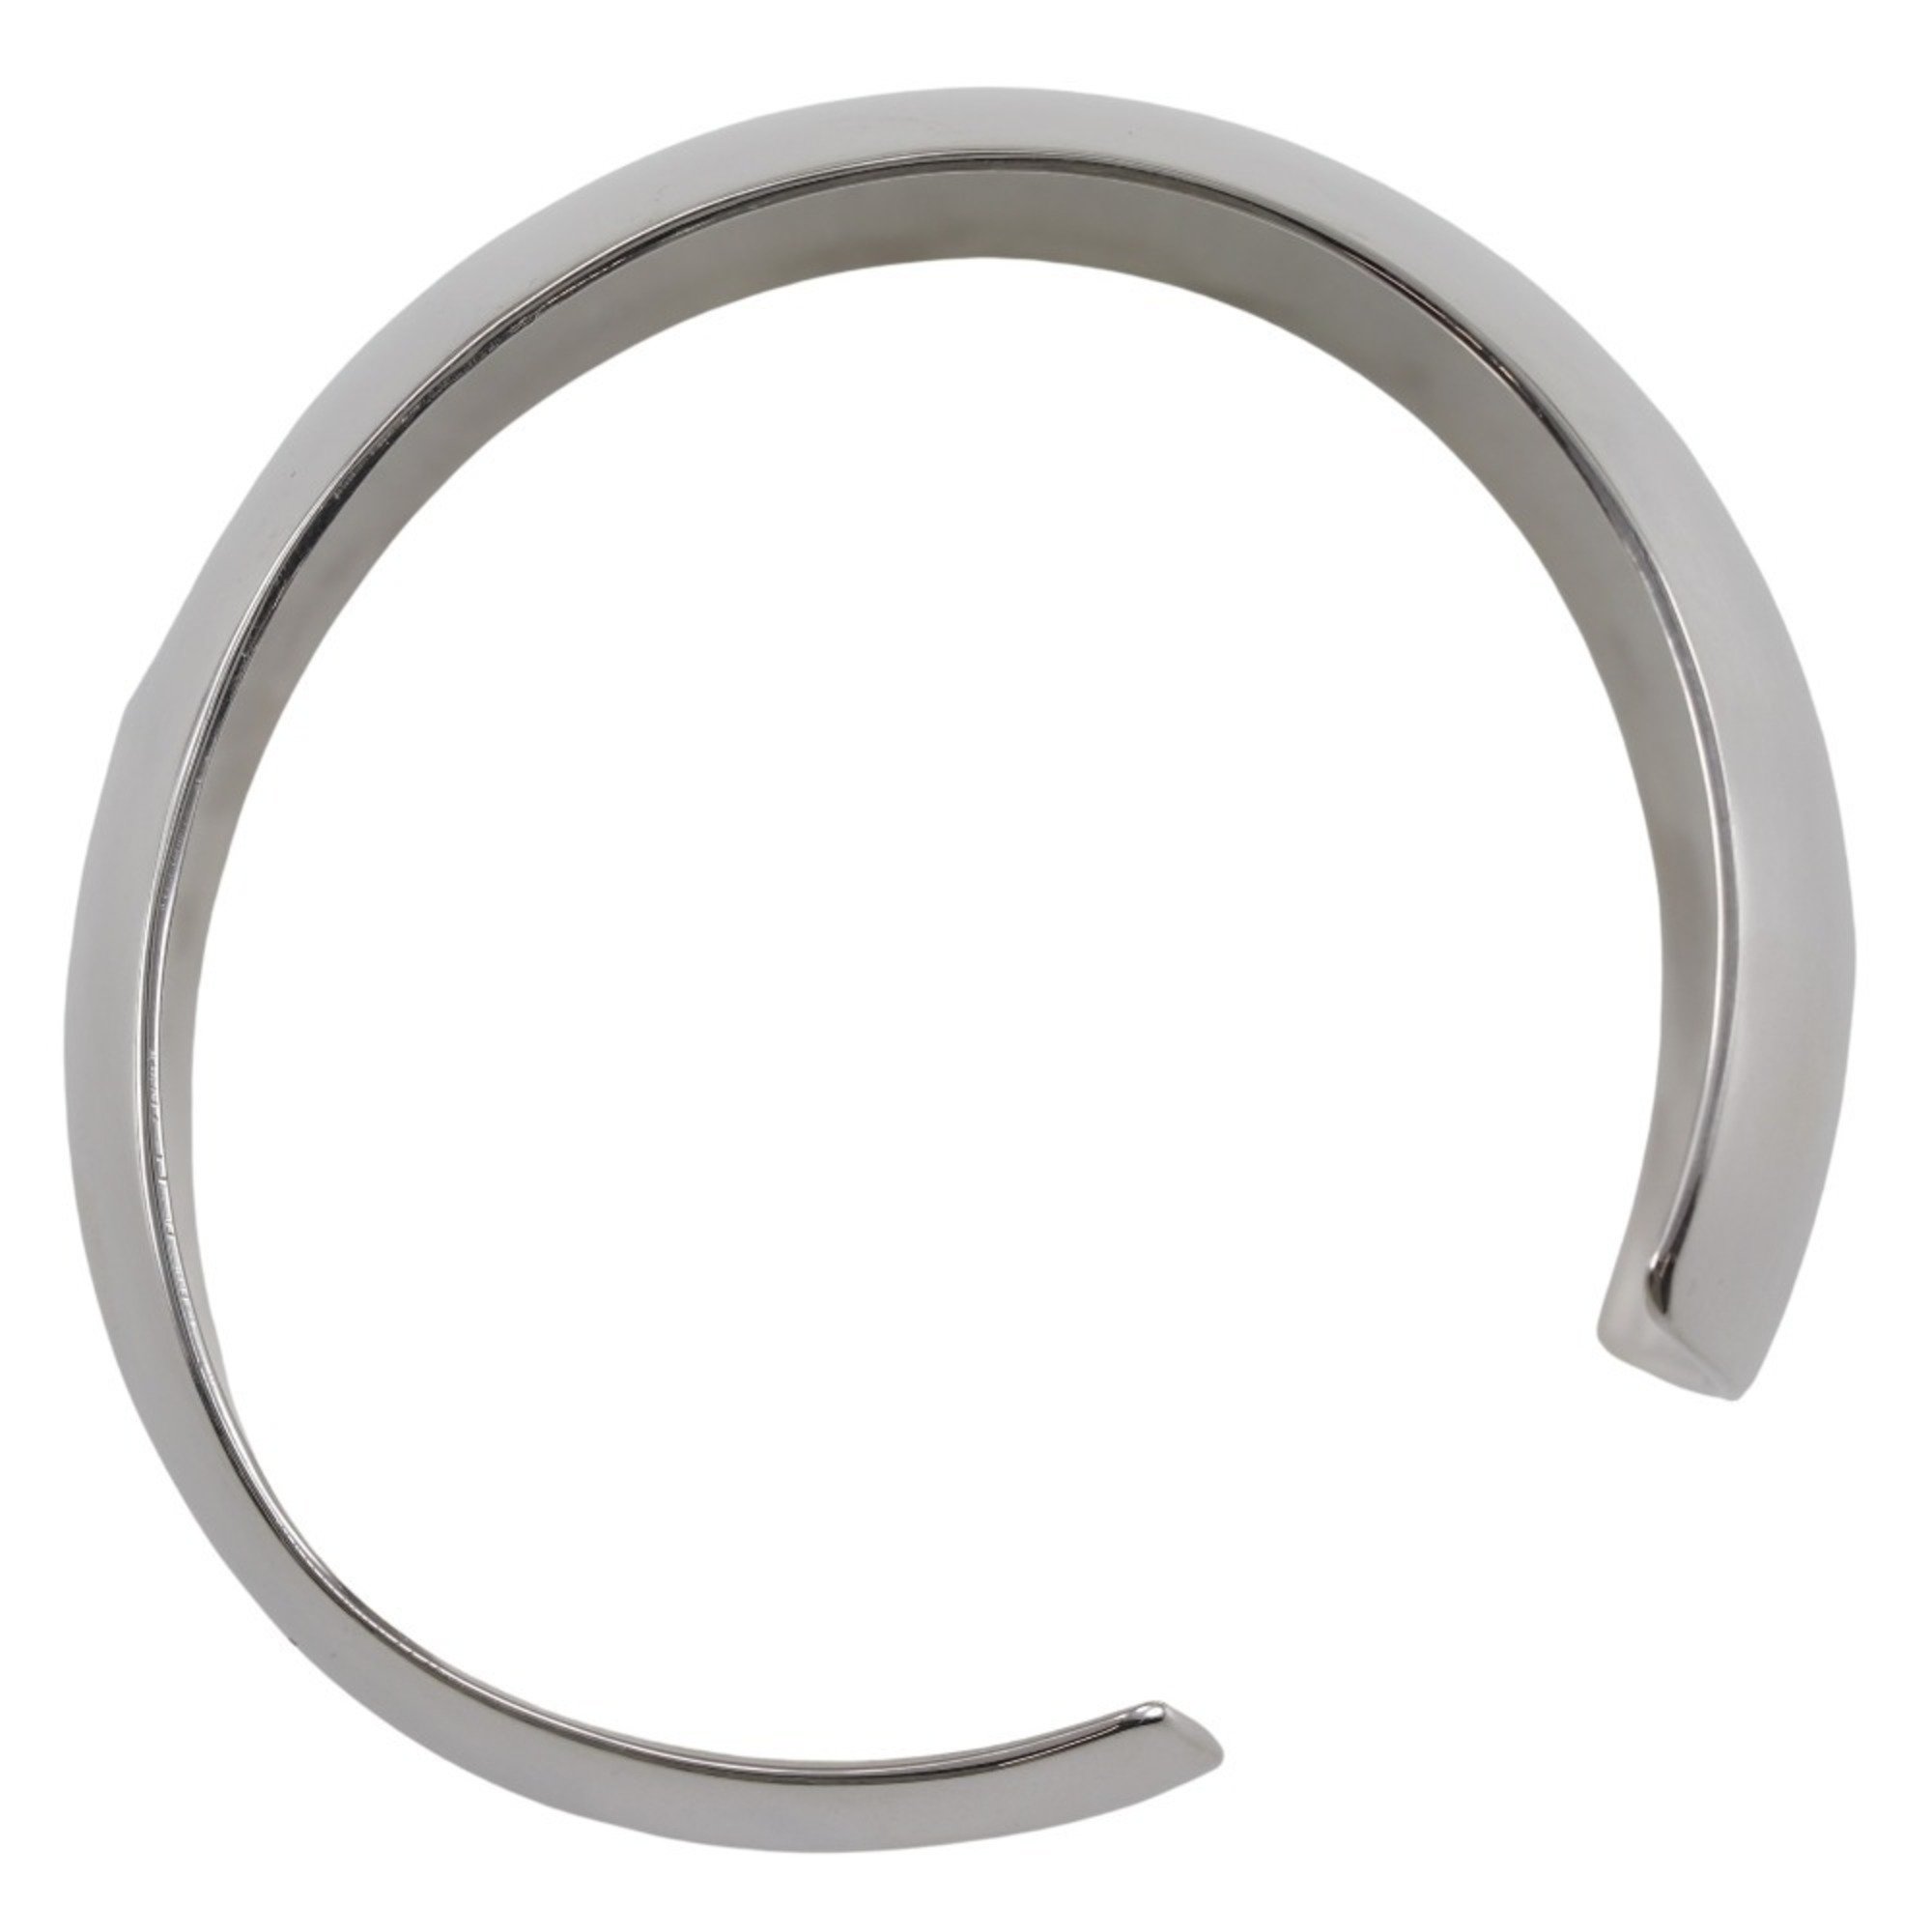 Gucci Bangle, Silver 925, approx. 70.4g, for women